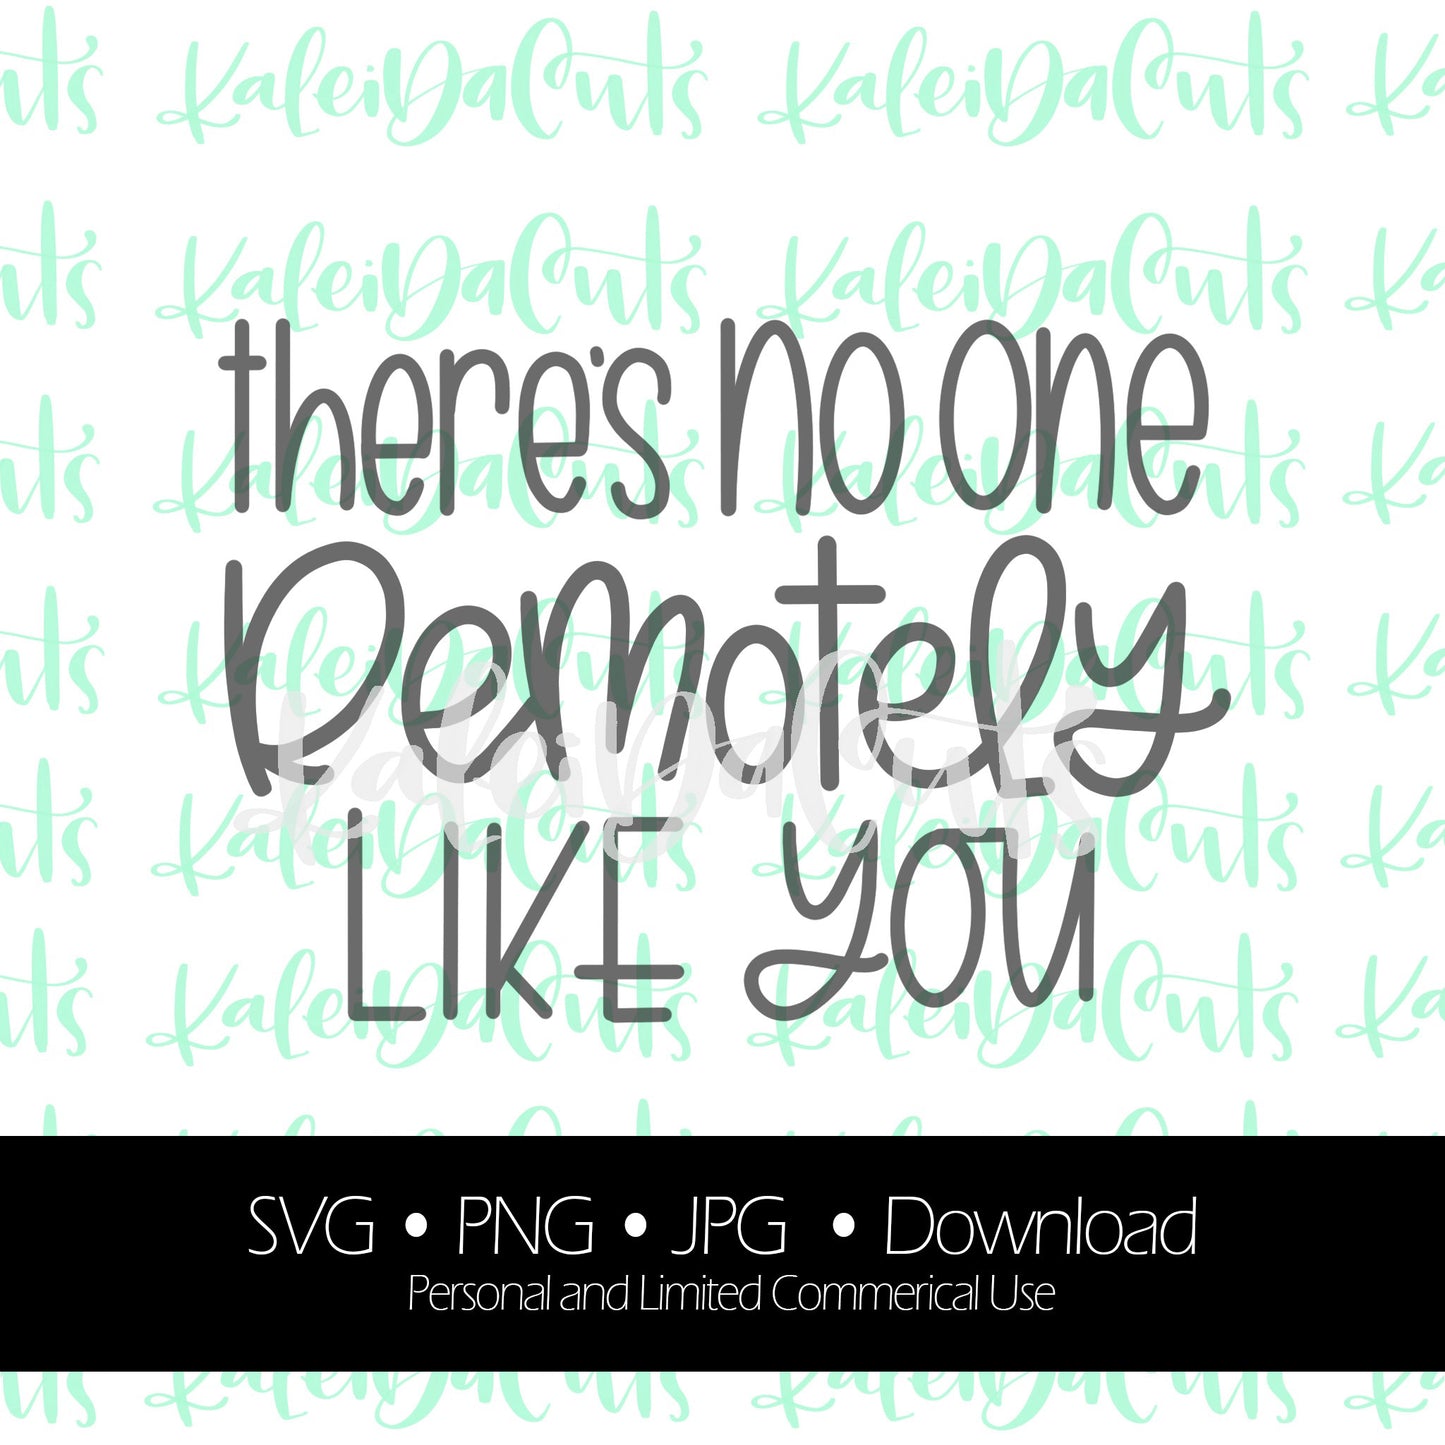 There's No One Remotely Like You - Digital Download.